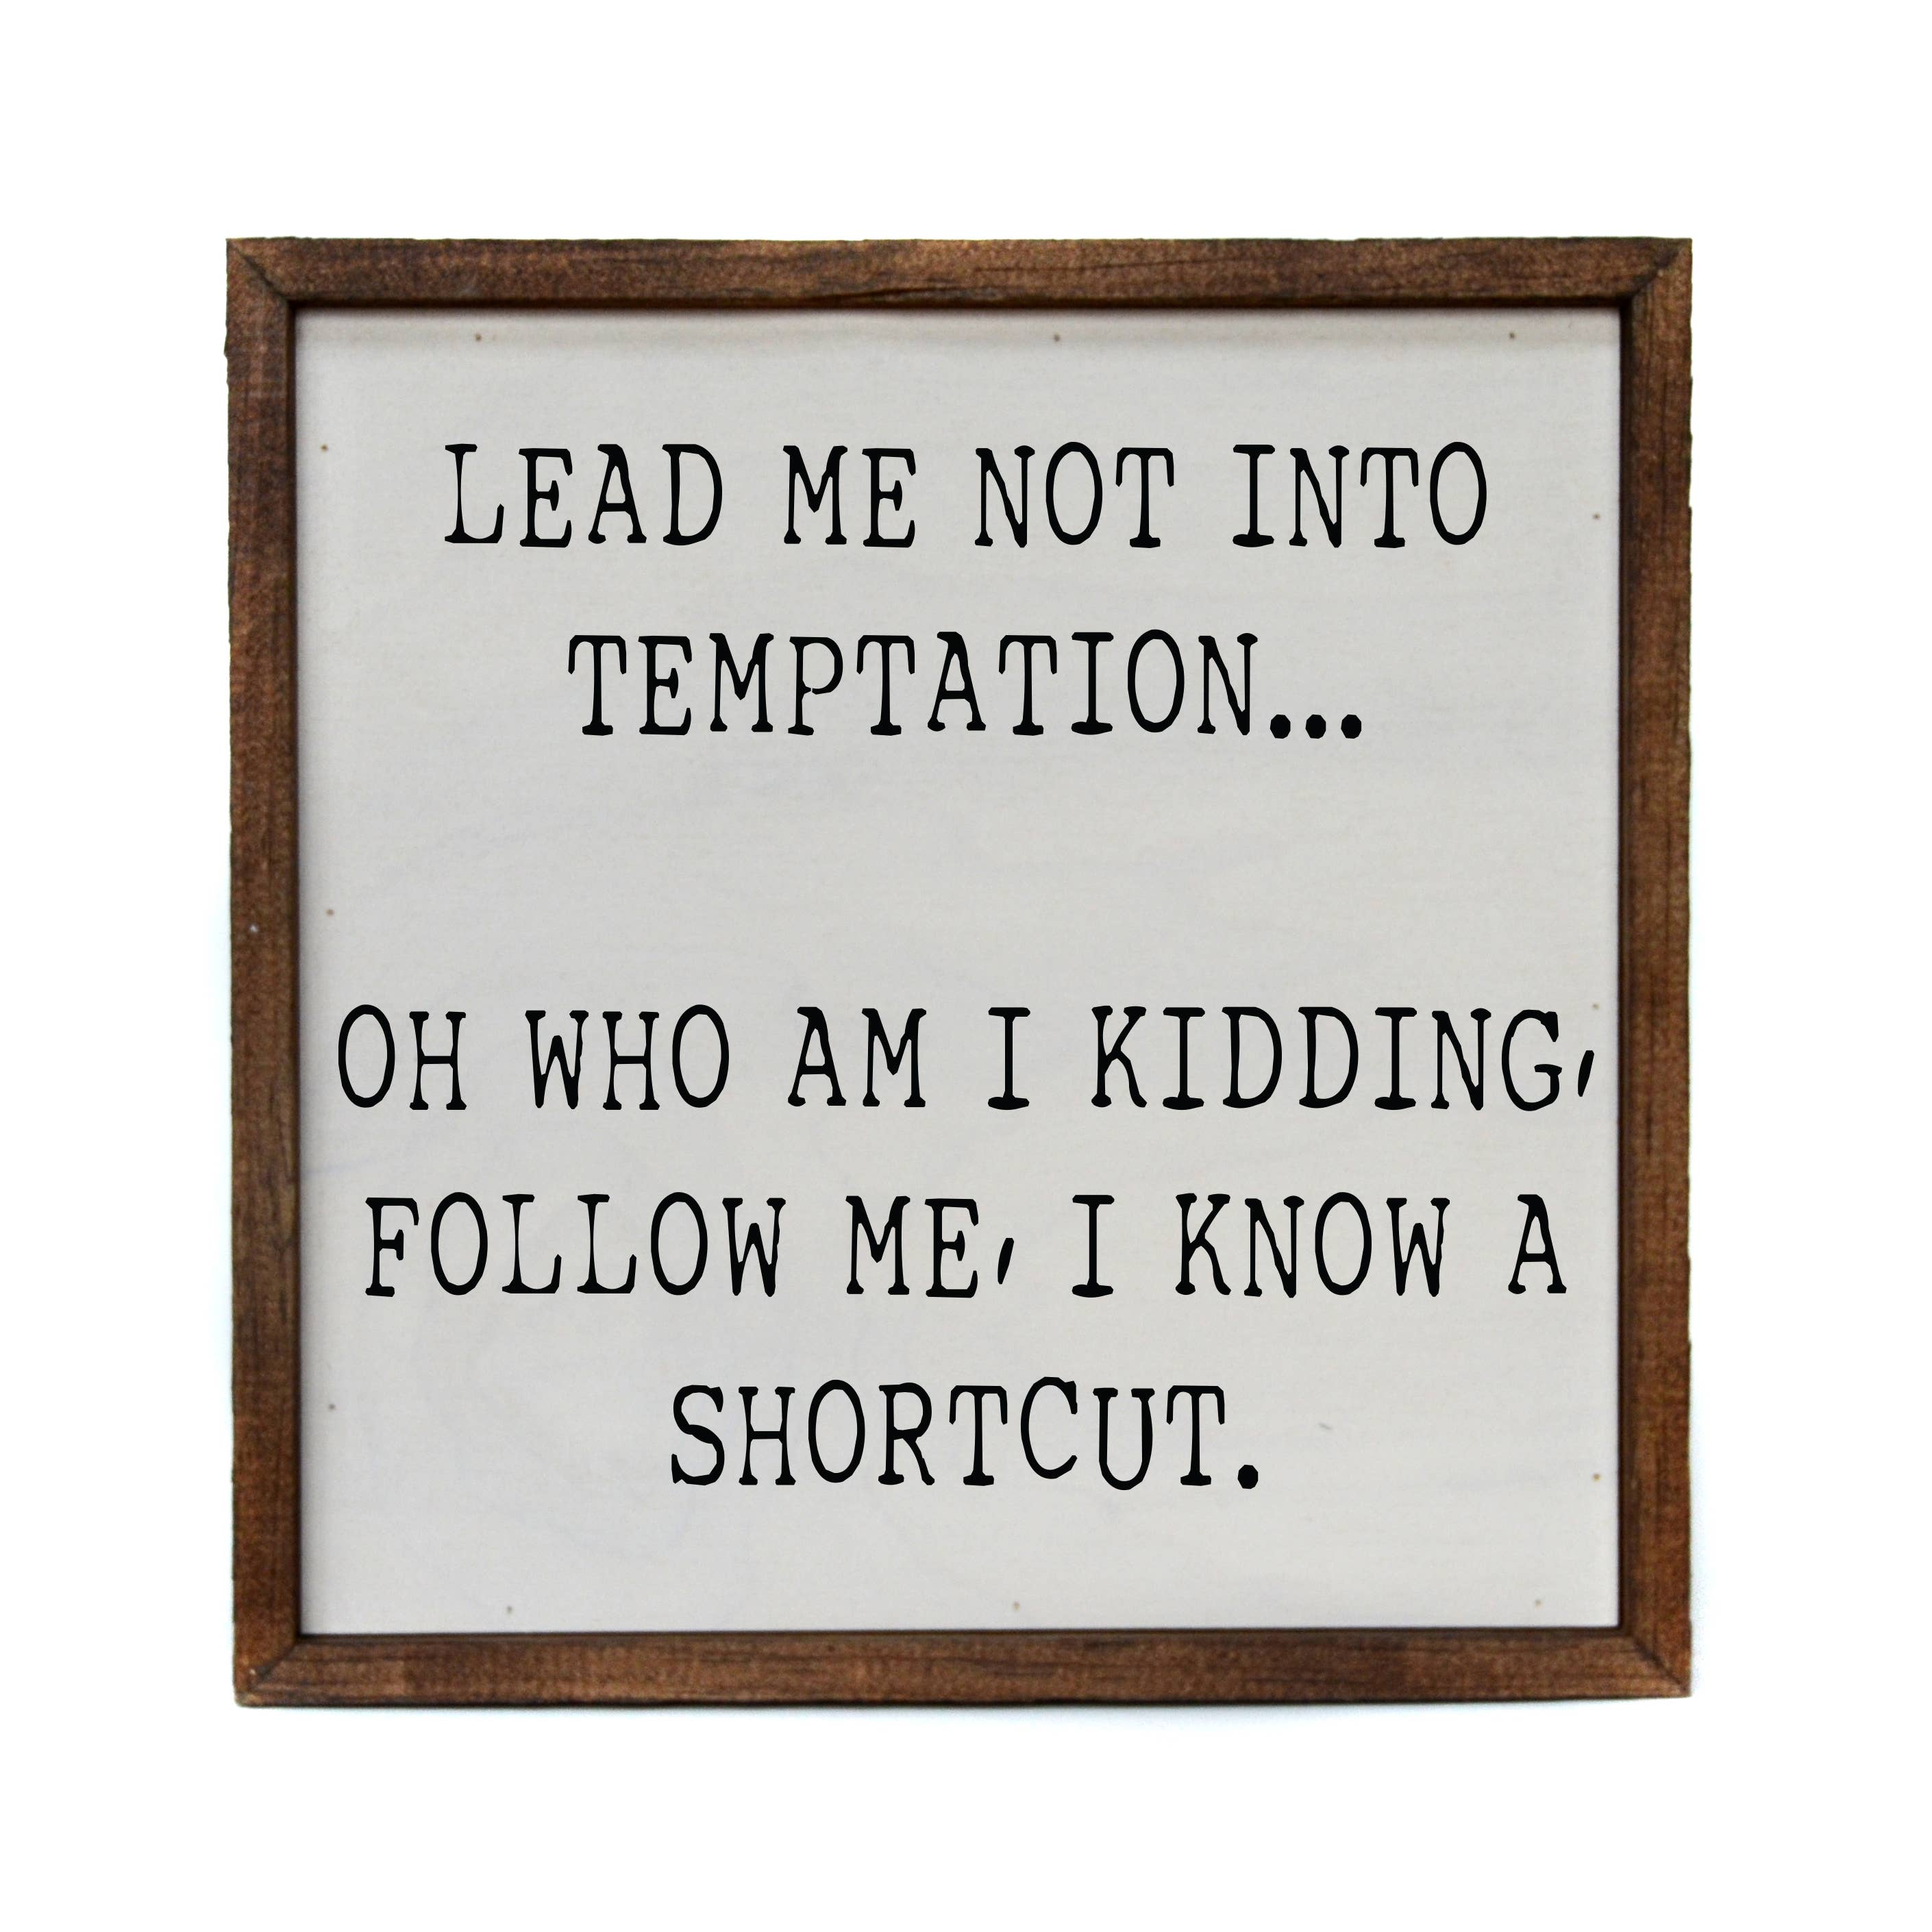 Lead Me Into Temptation... Oh Who Am I Kidding Sign - $20.00